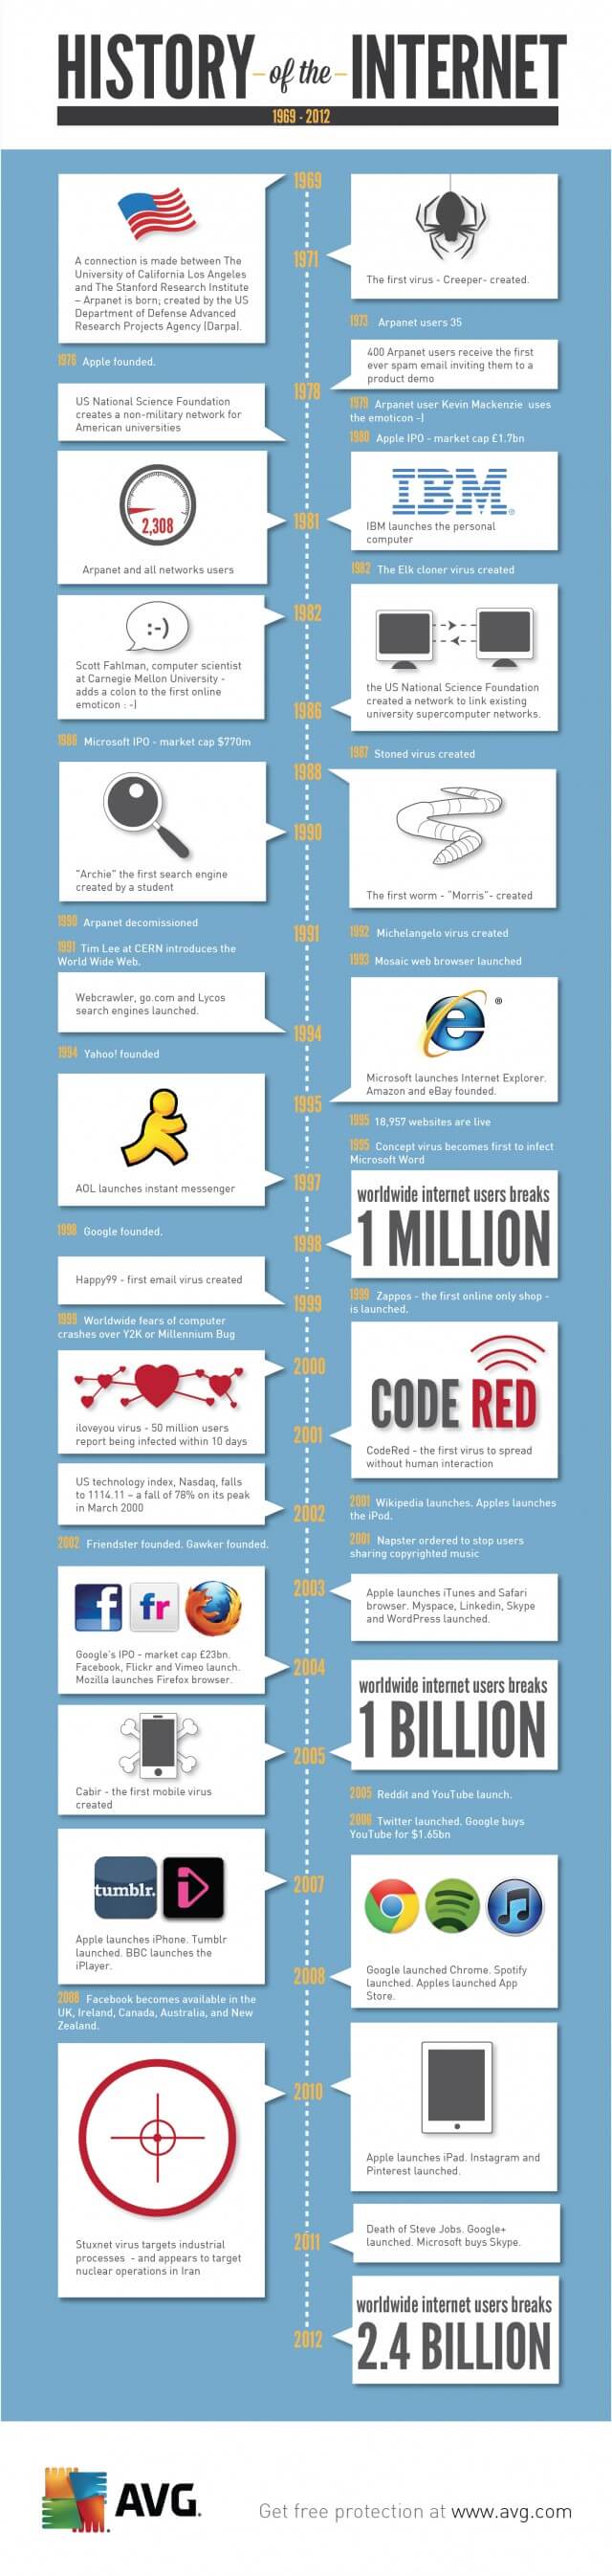 history-of-the-internet-640x2692